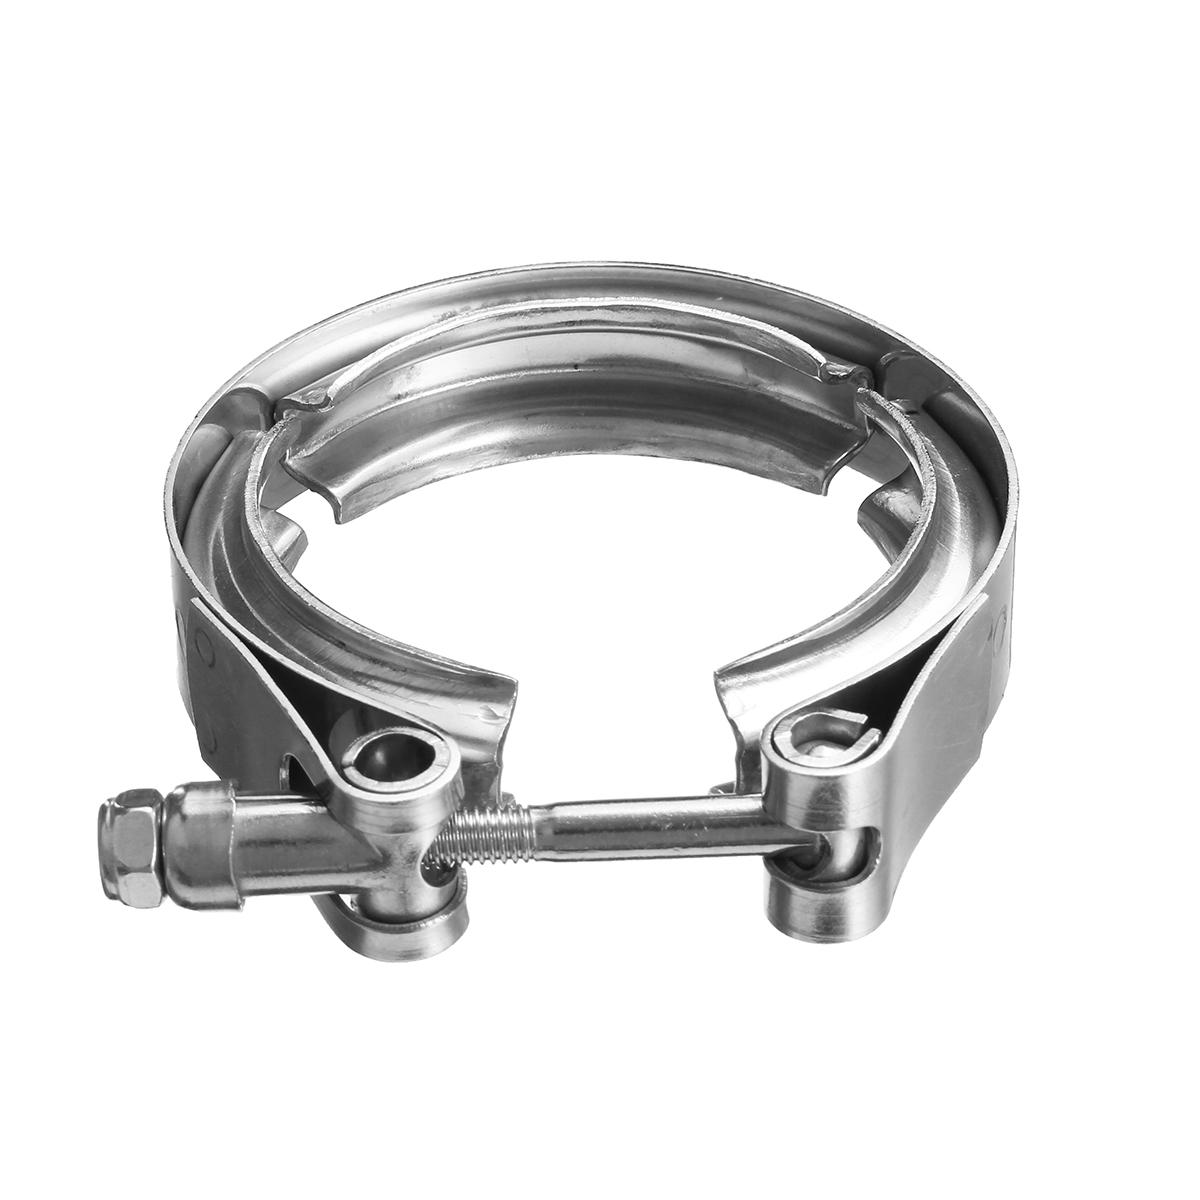 Universal car hose clamp v band exhaust muffler clamp 2 inch 4 inch 304